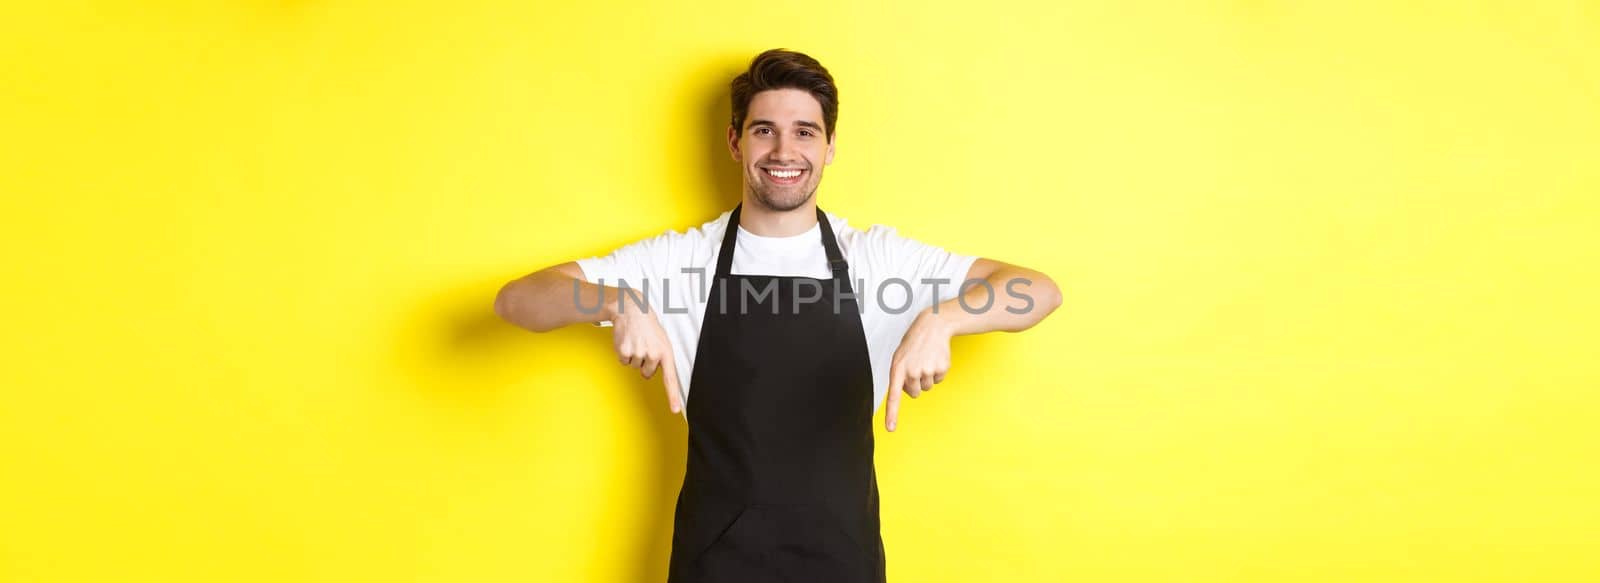 Friendly barista in black apron pointing fingers down, showing your logo banner, standing over yellow background.